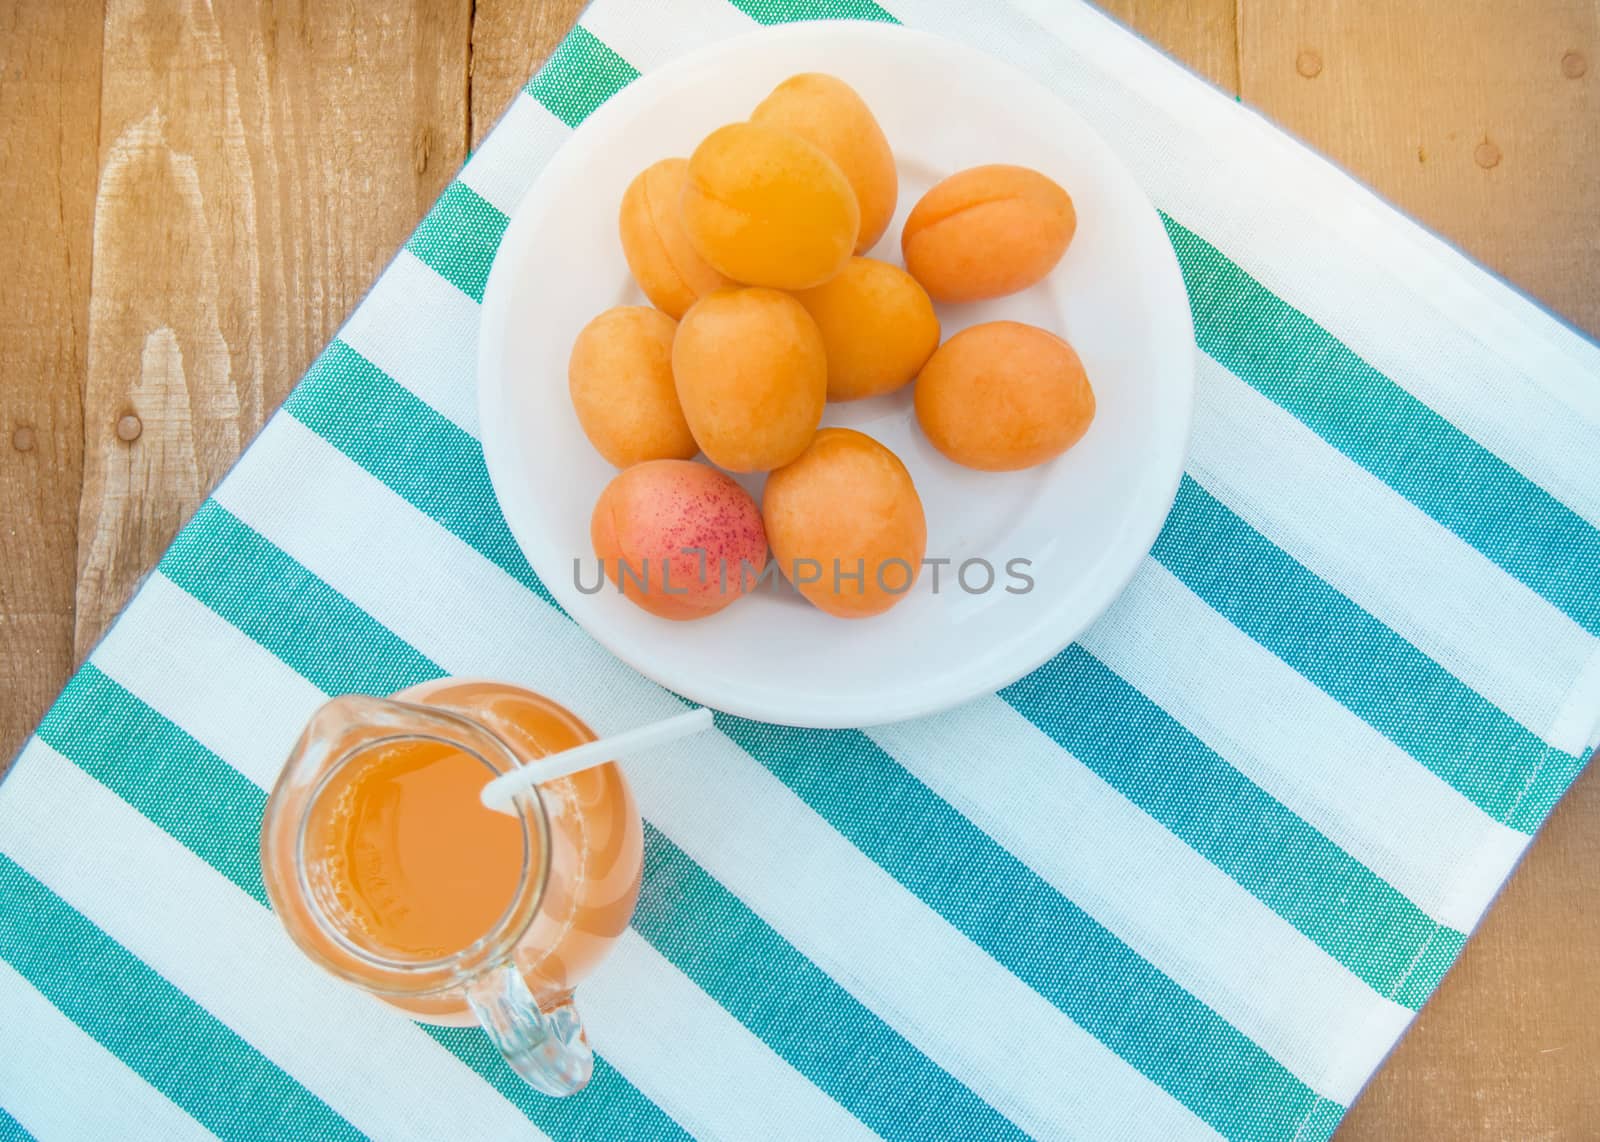 Summer drink and fruit-fresh apricot juice in a glass jug and ripe apricots on a napkin, top view, outdoor.